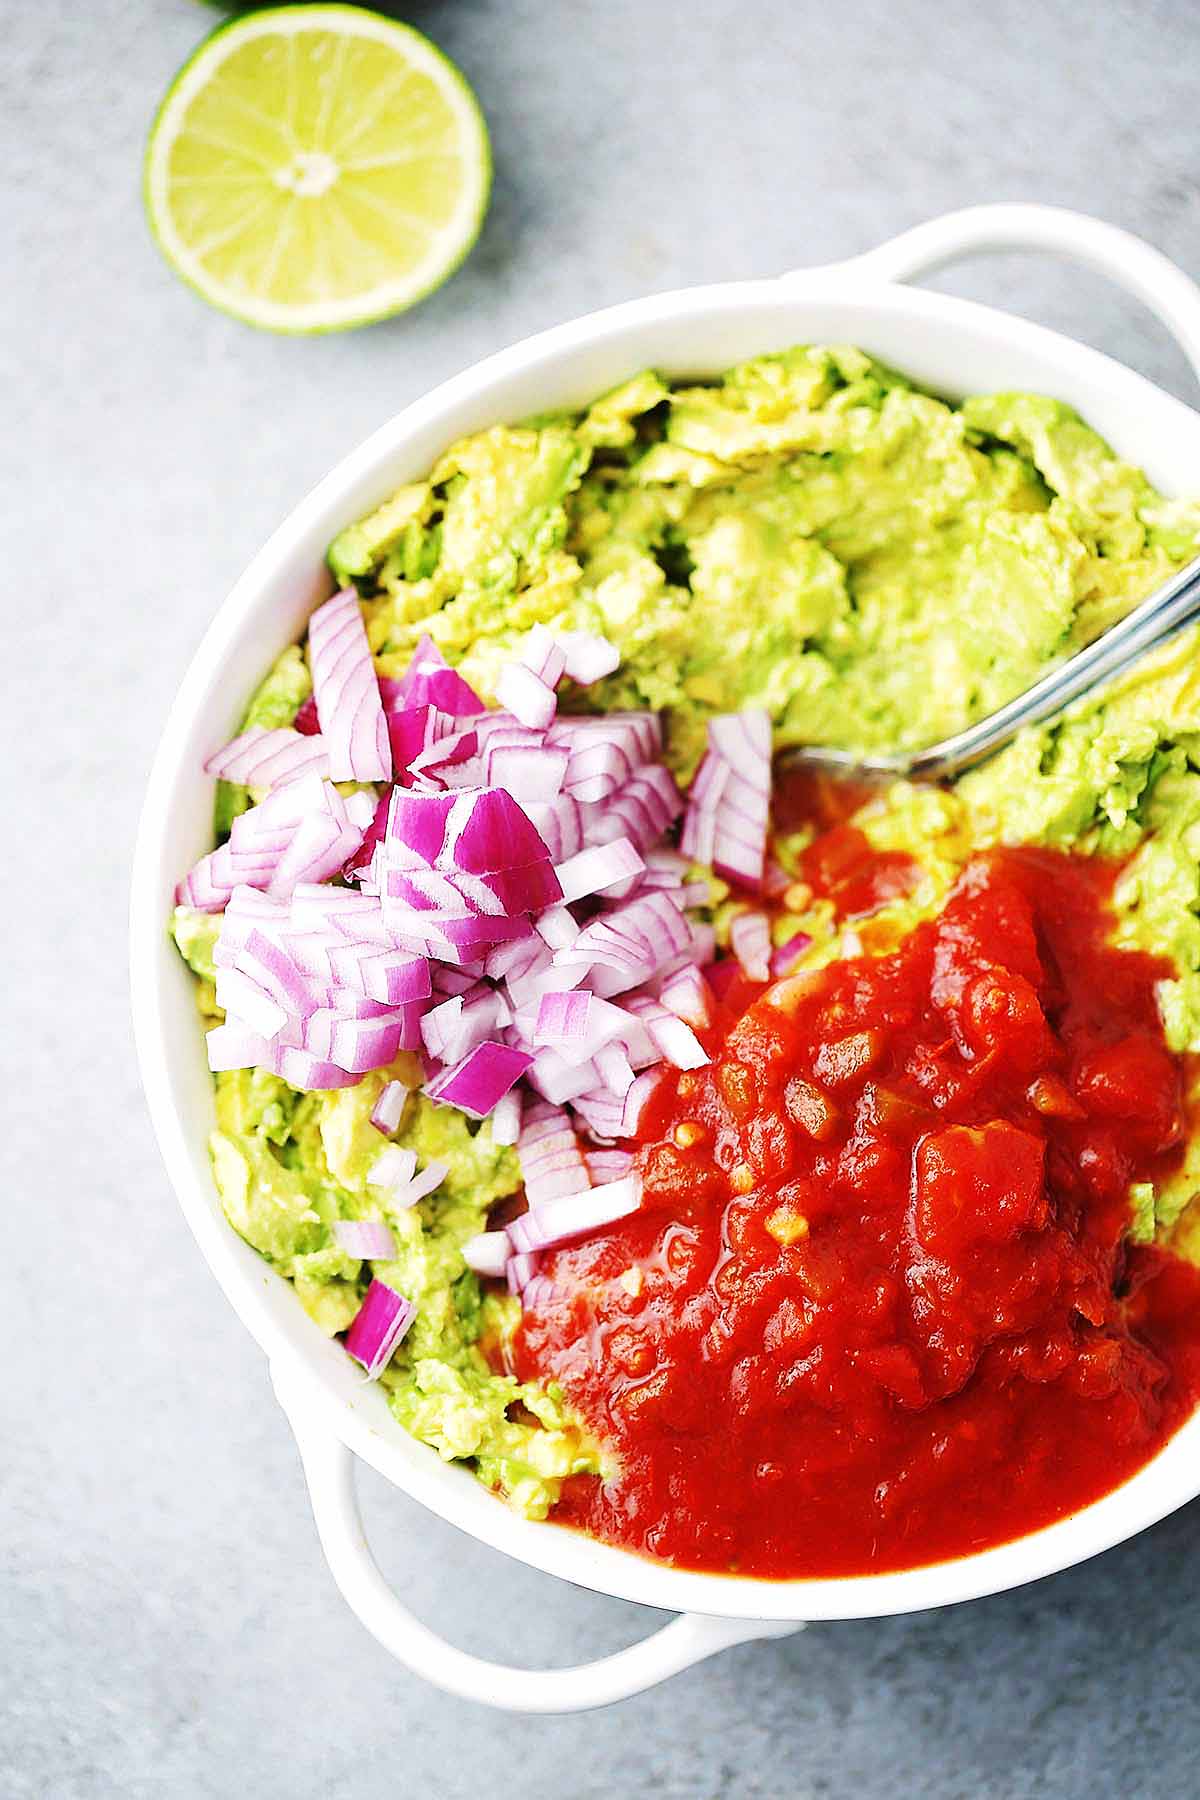 Dish with guacamole ingredients.